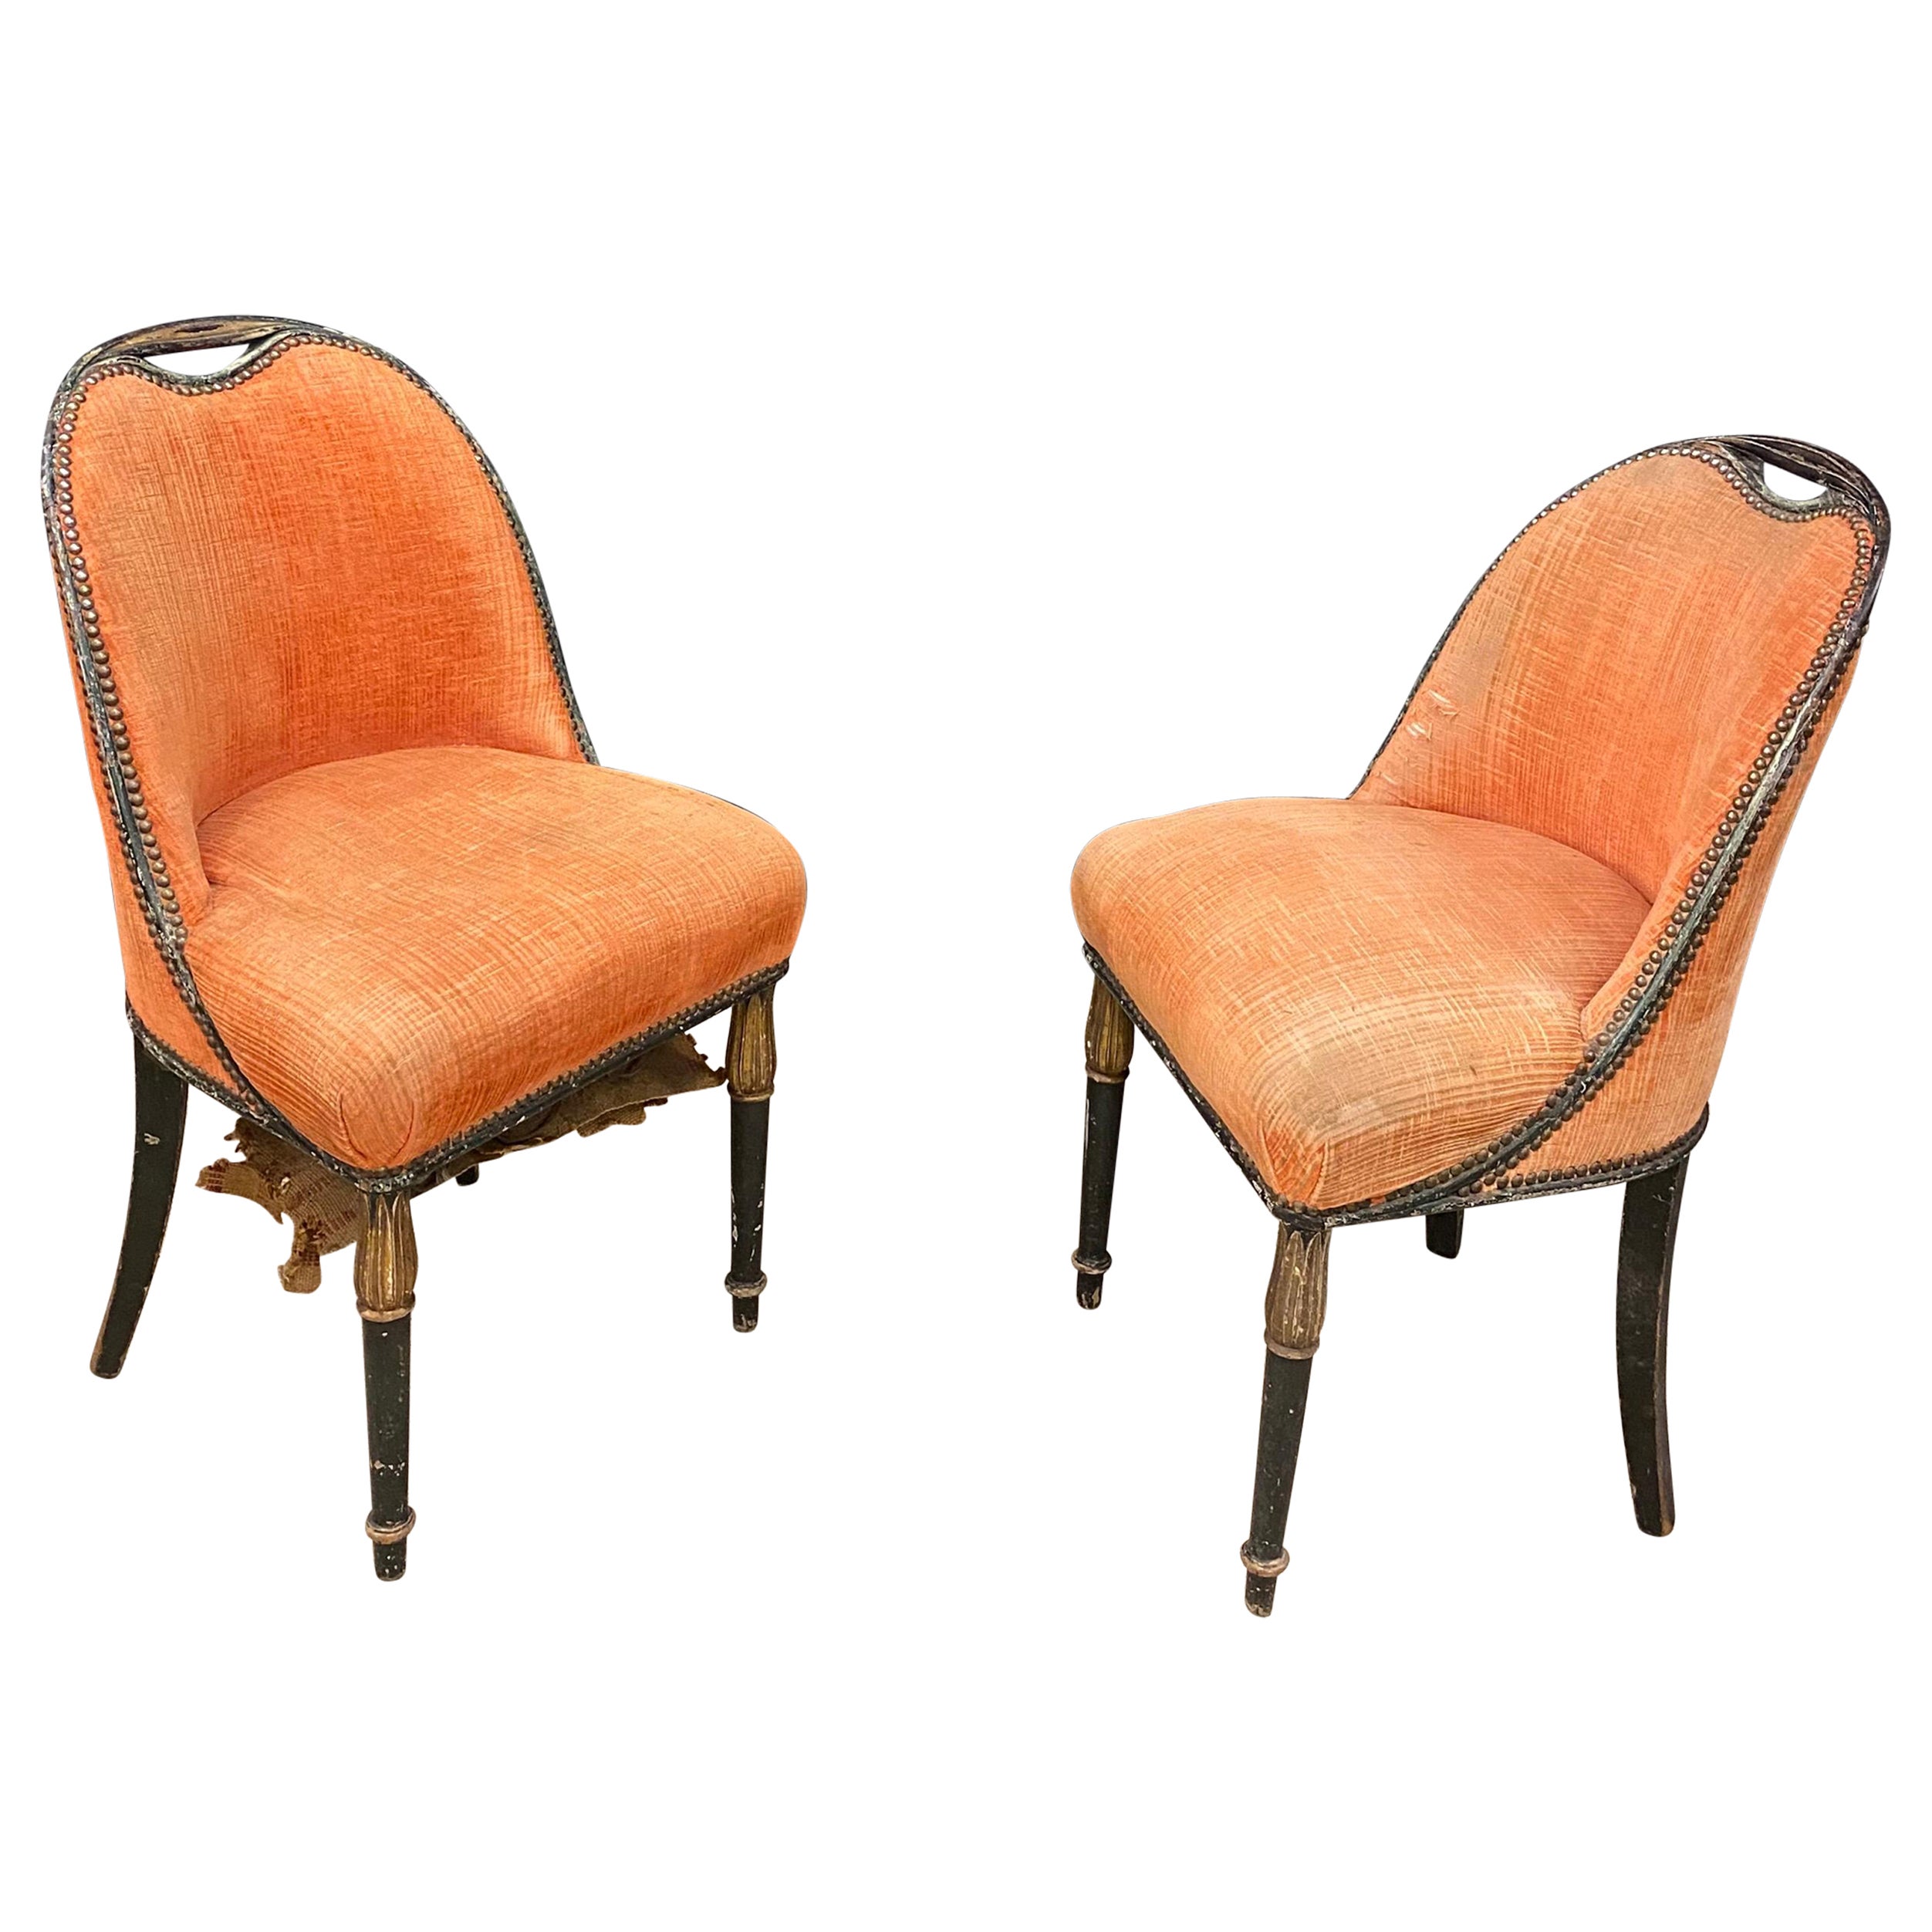 Two Art Deco Chairs in the Style of Sue et Mare in Polychrome Wood, circa 1925 For Sale